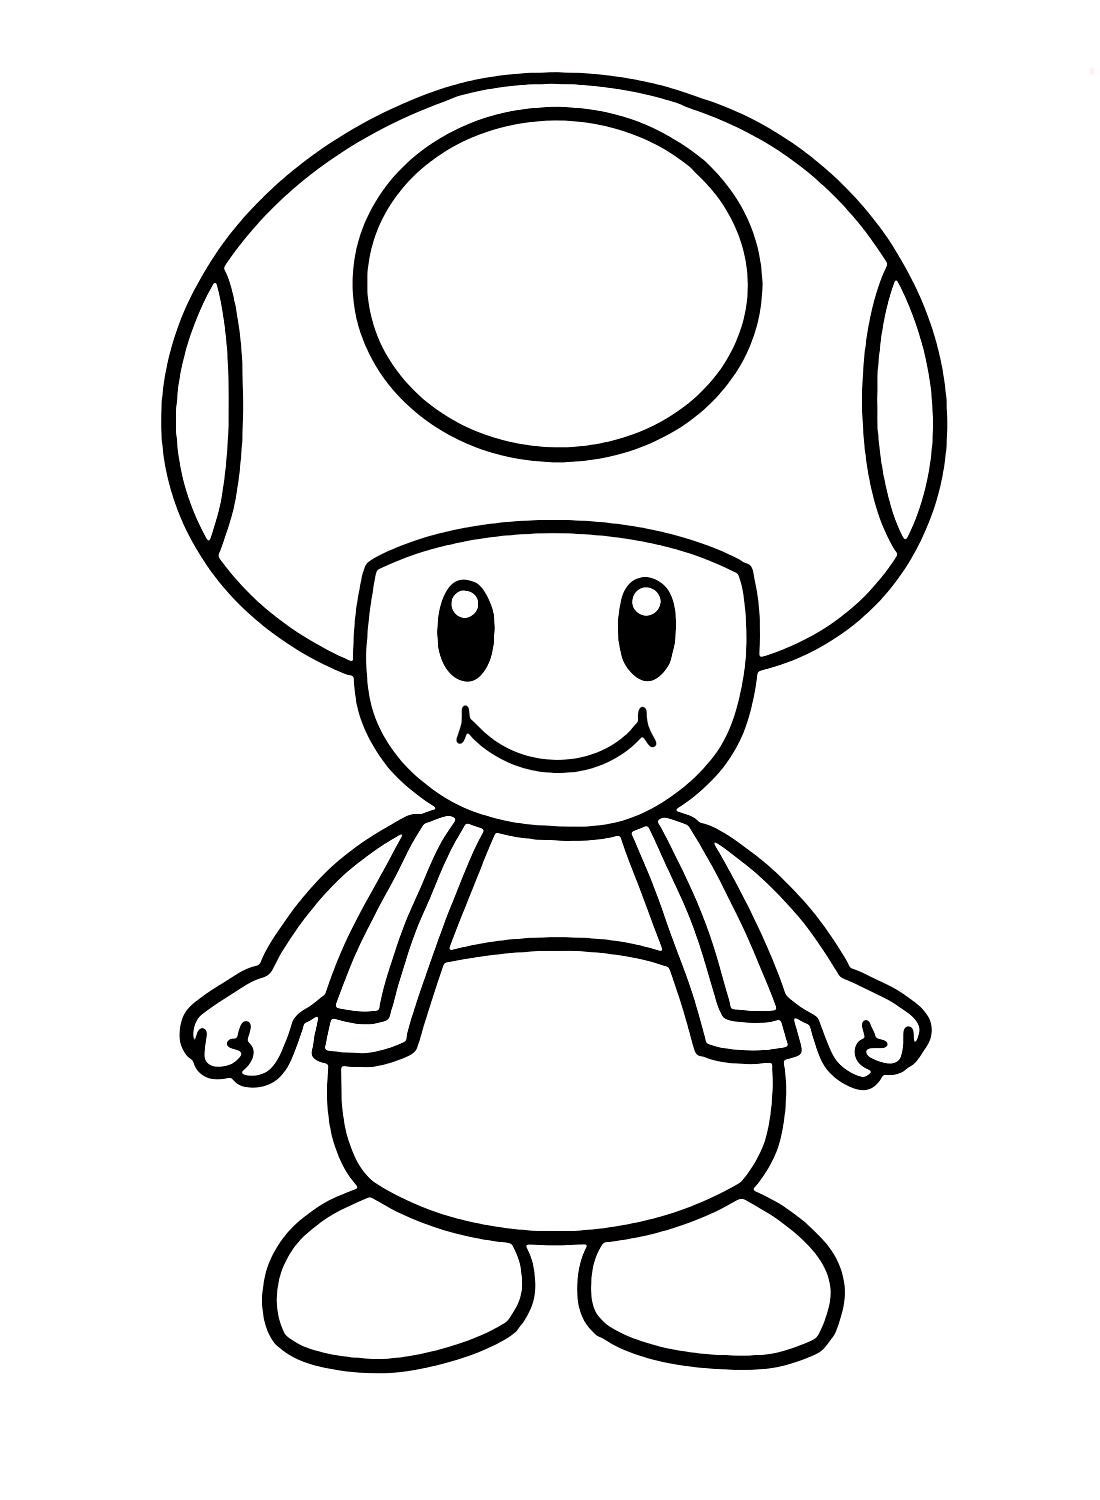 Toad Super Mario Images from Toad Mario